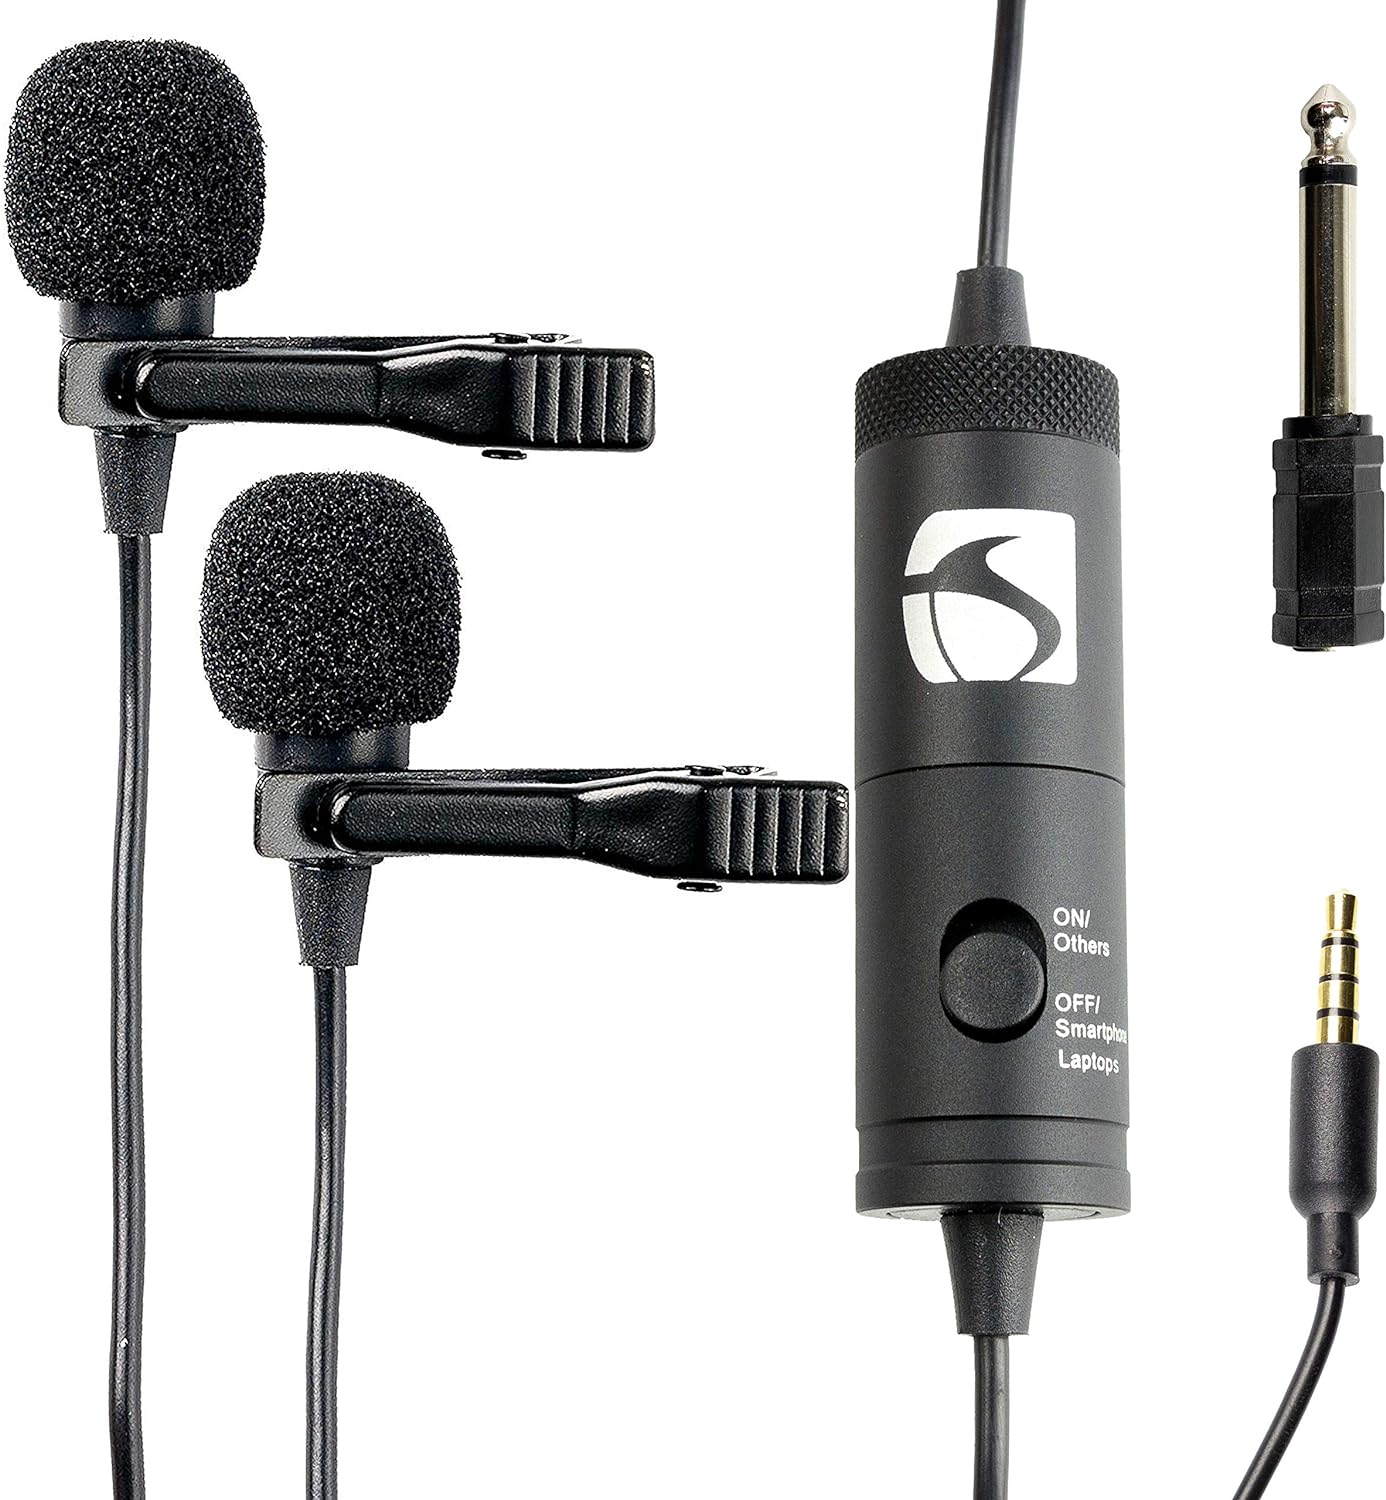 Industry Standard Sound LM200 Dual Lavalier Microphones